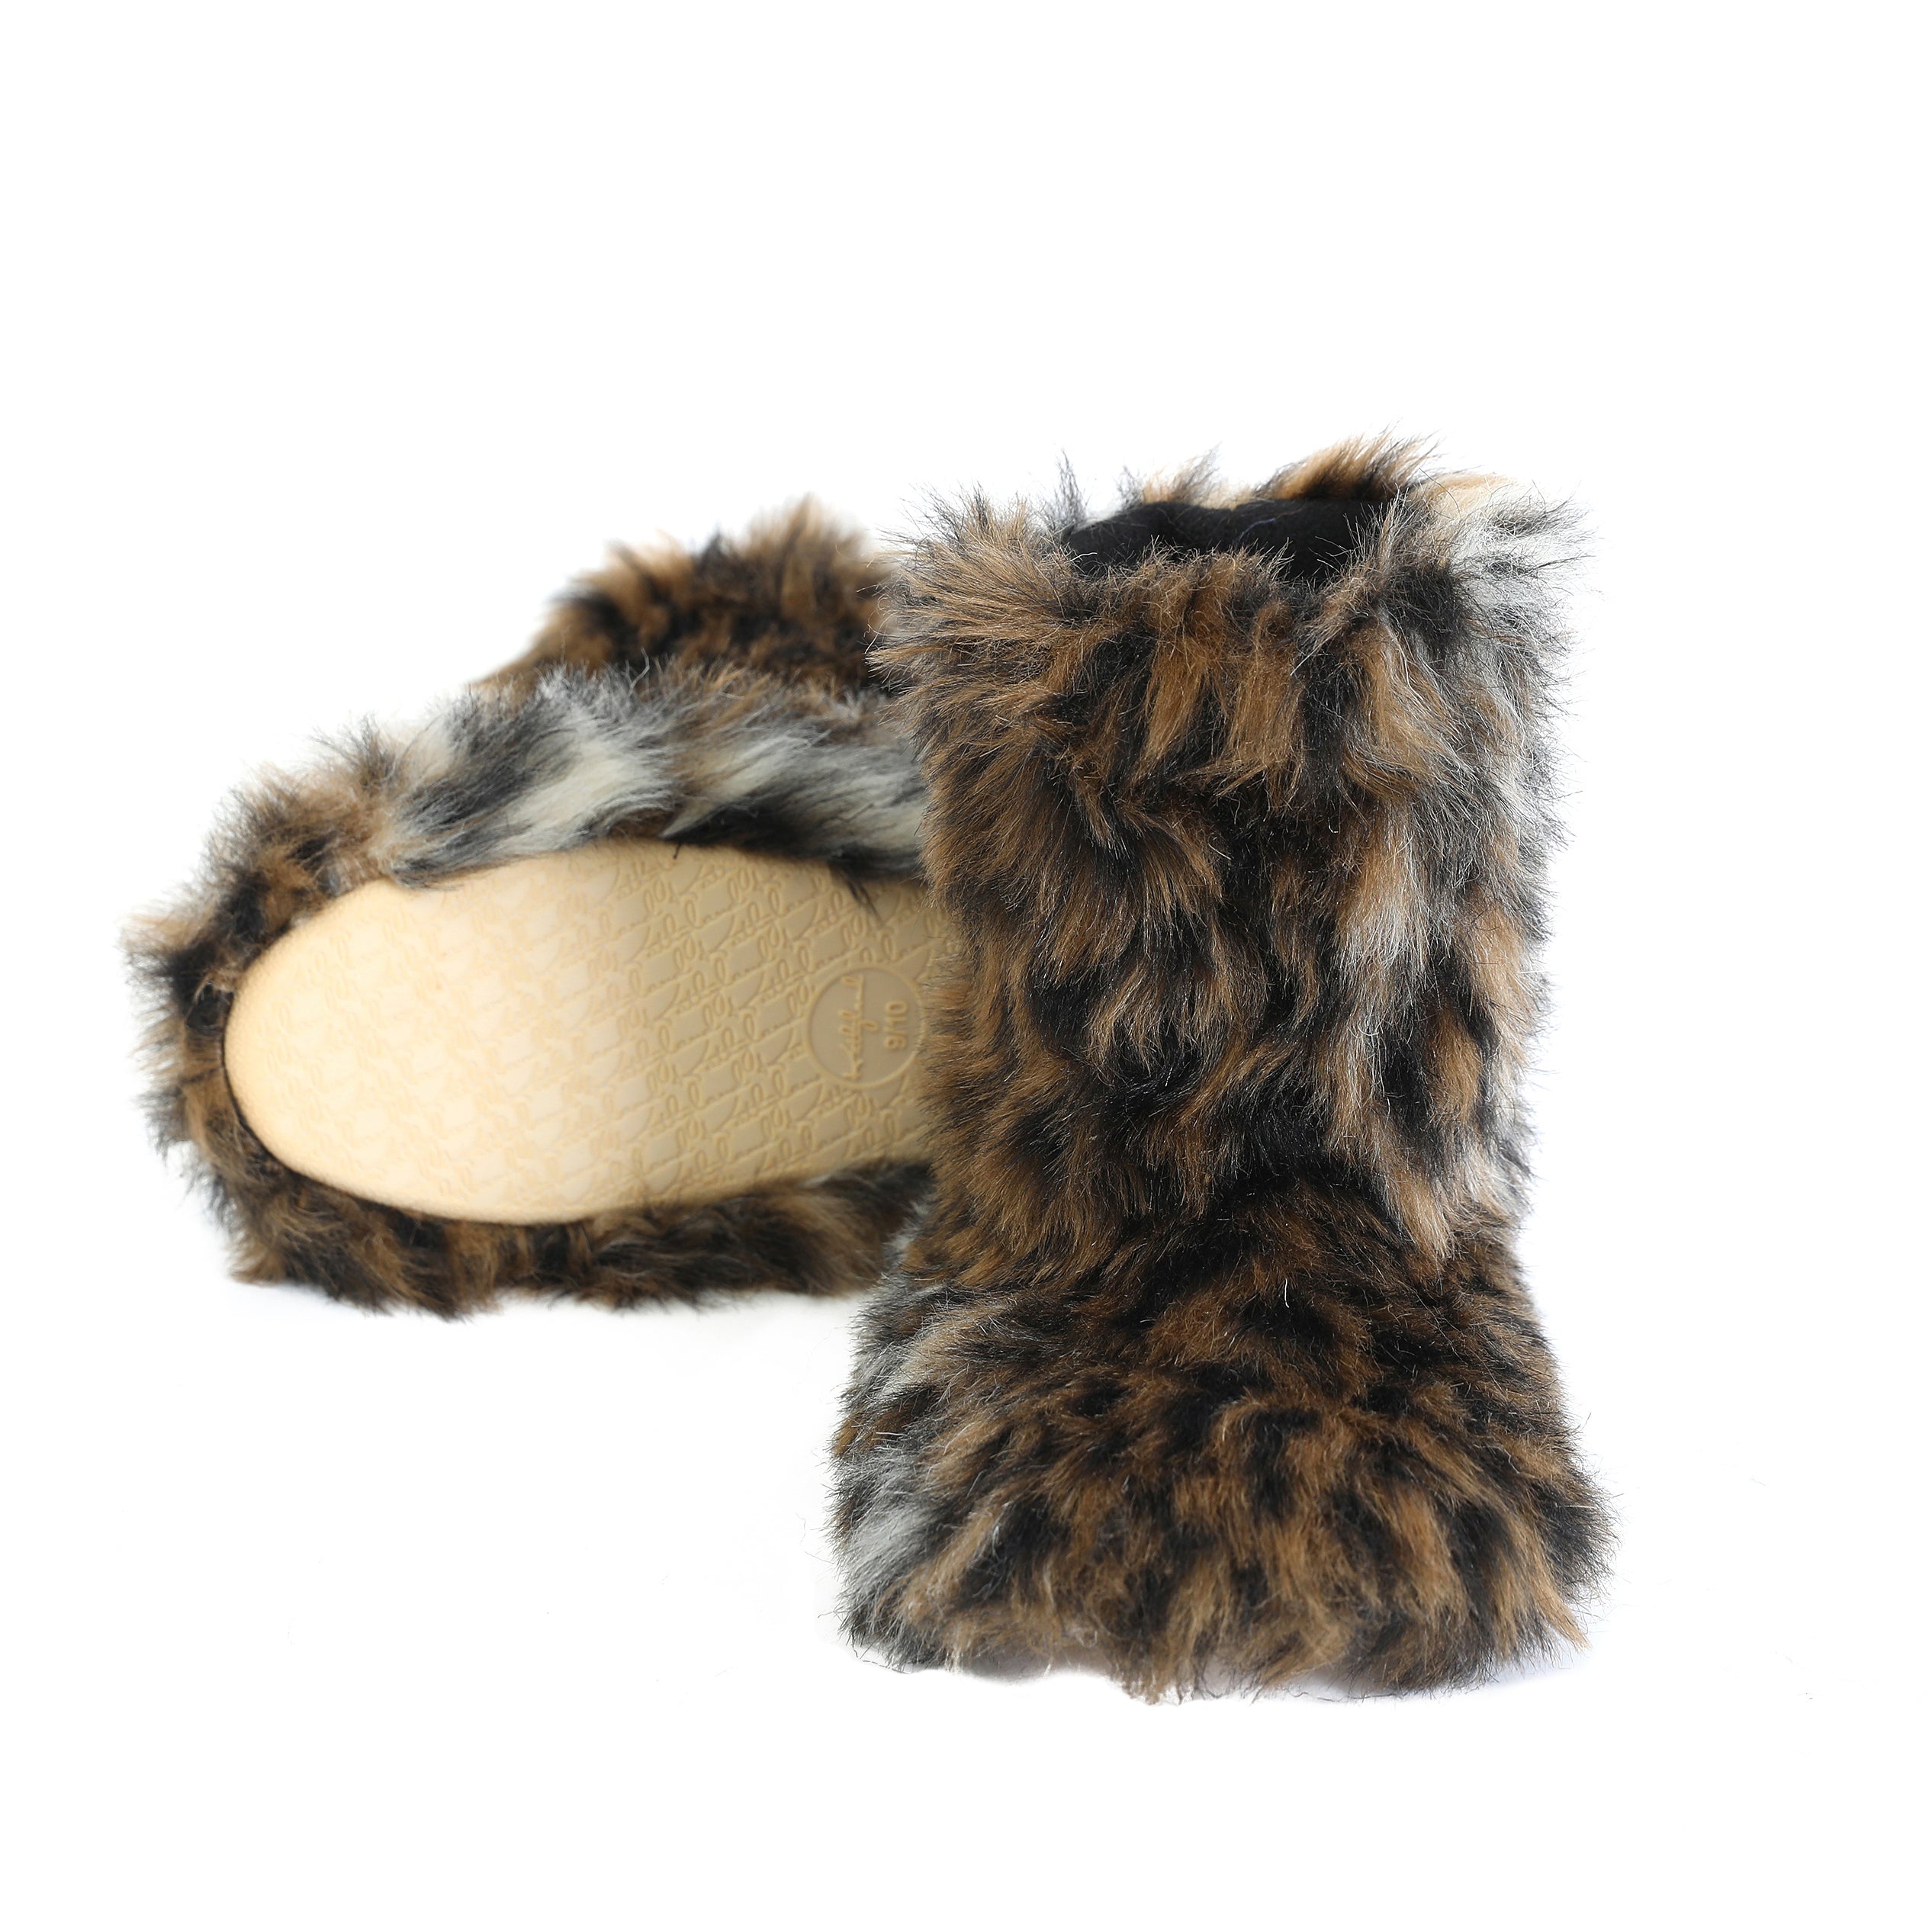 Millffy Winter Warm Women's Faux Fur Bootie Slippers Fuzzy Comfy Plush Boots